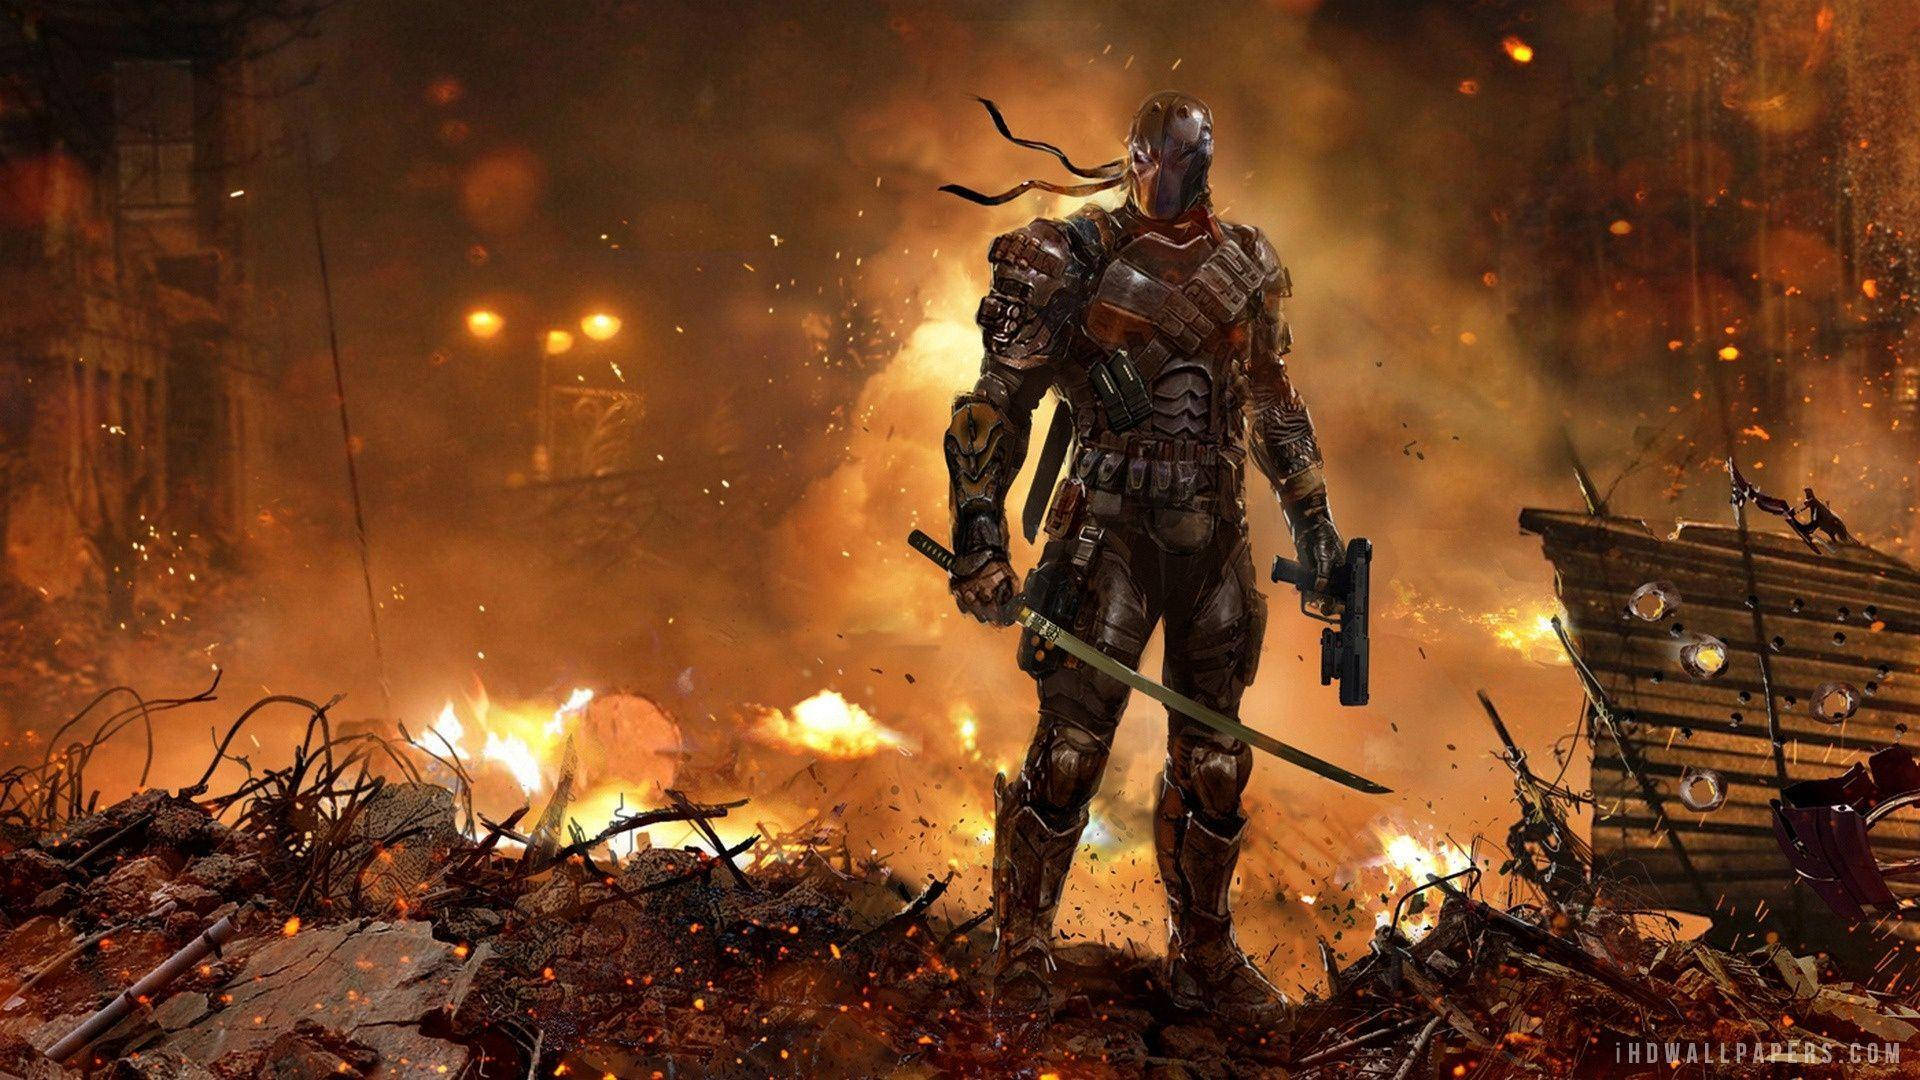 A Man In Armor Standing In A City With Fire Background